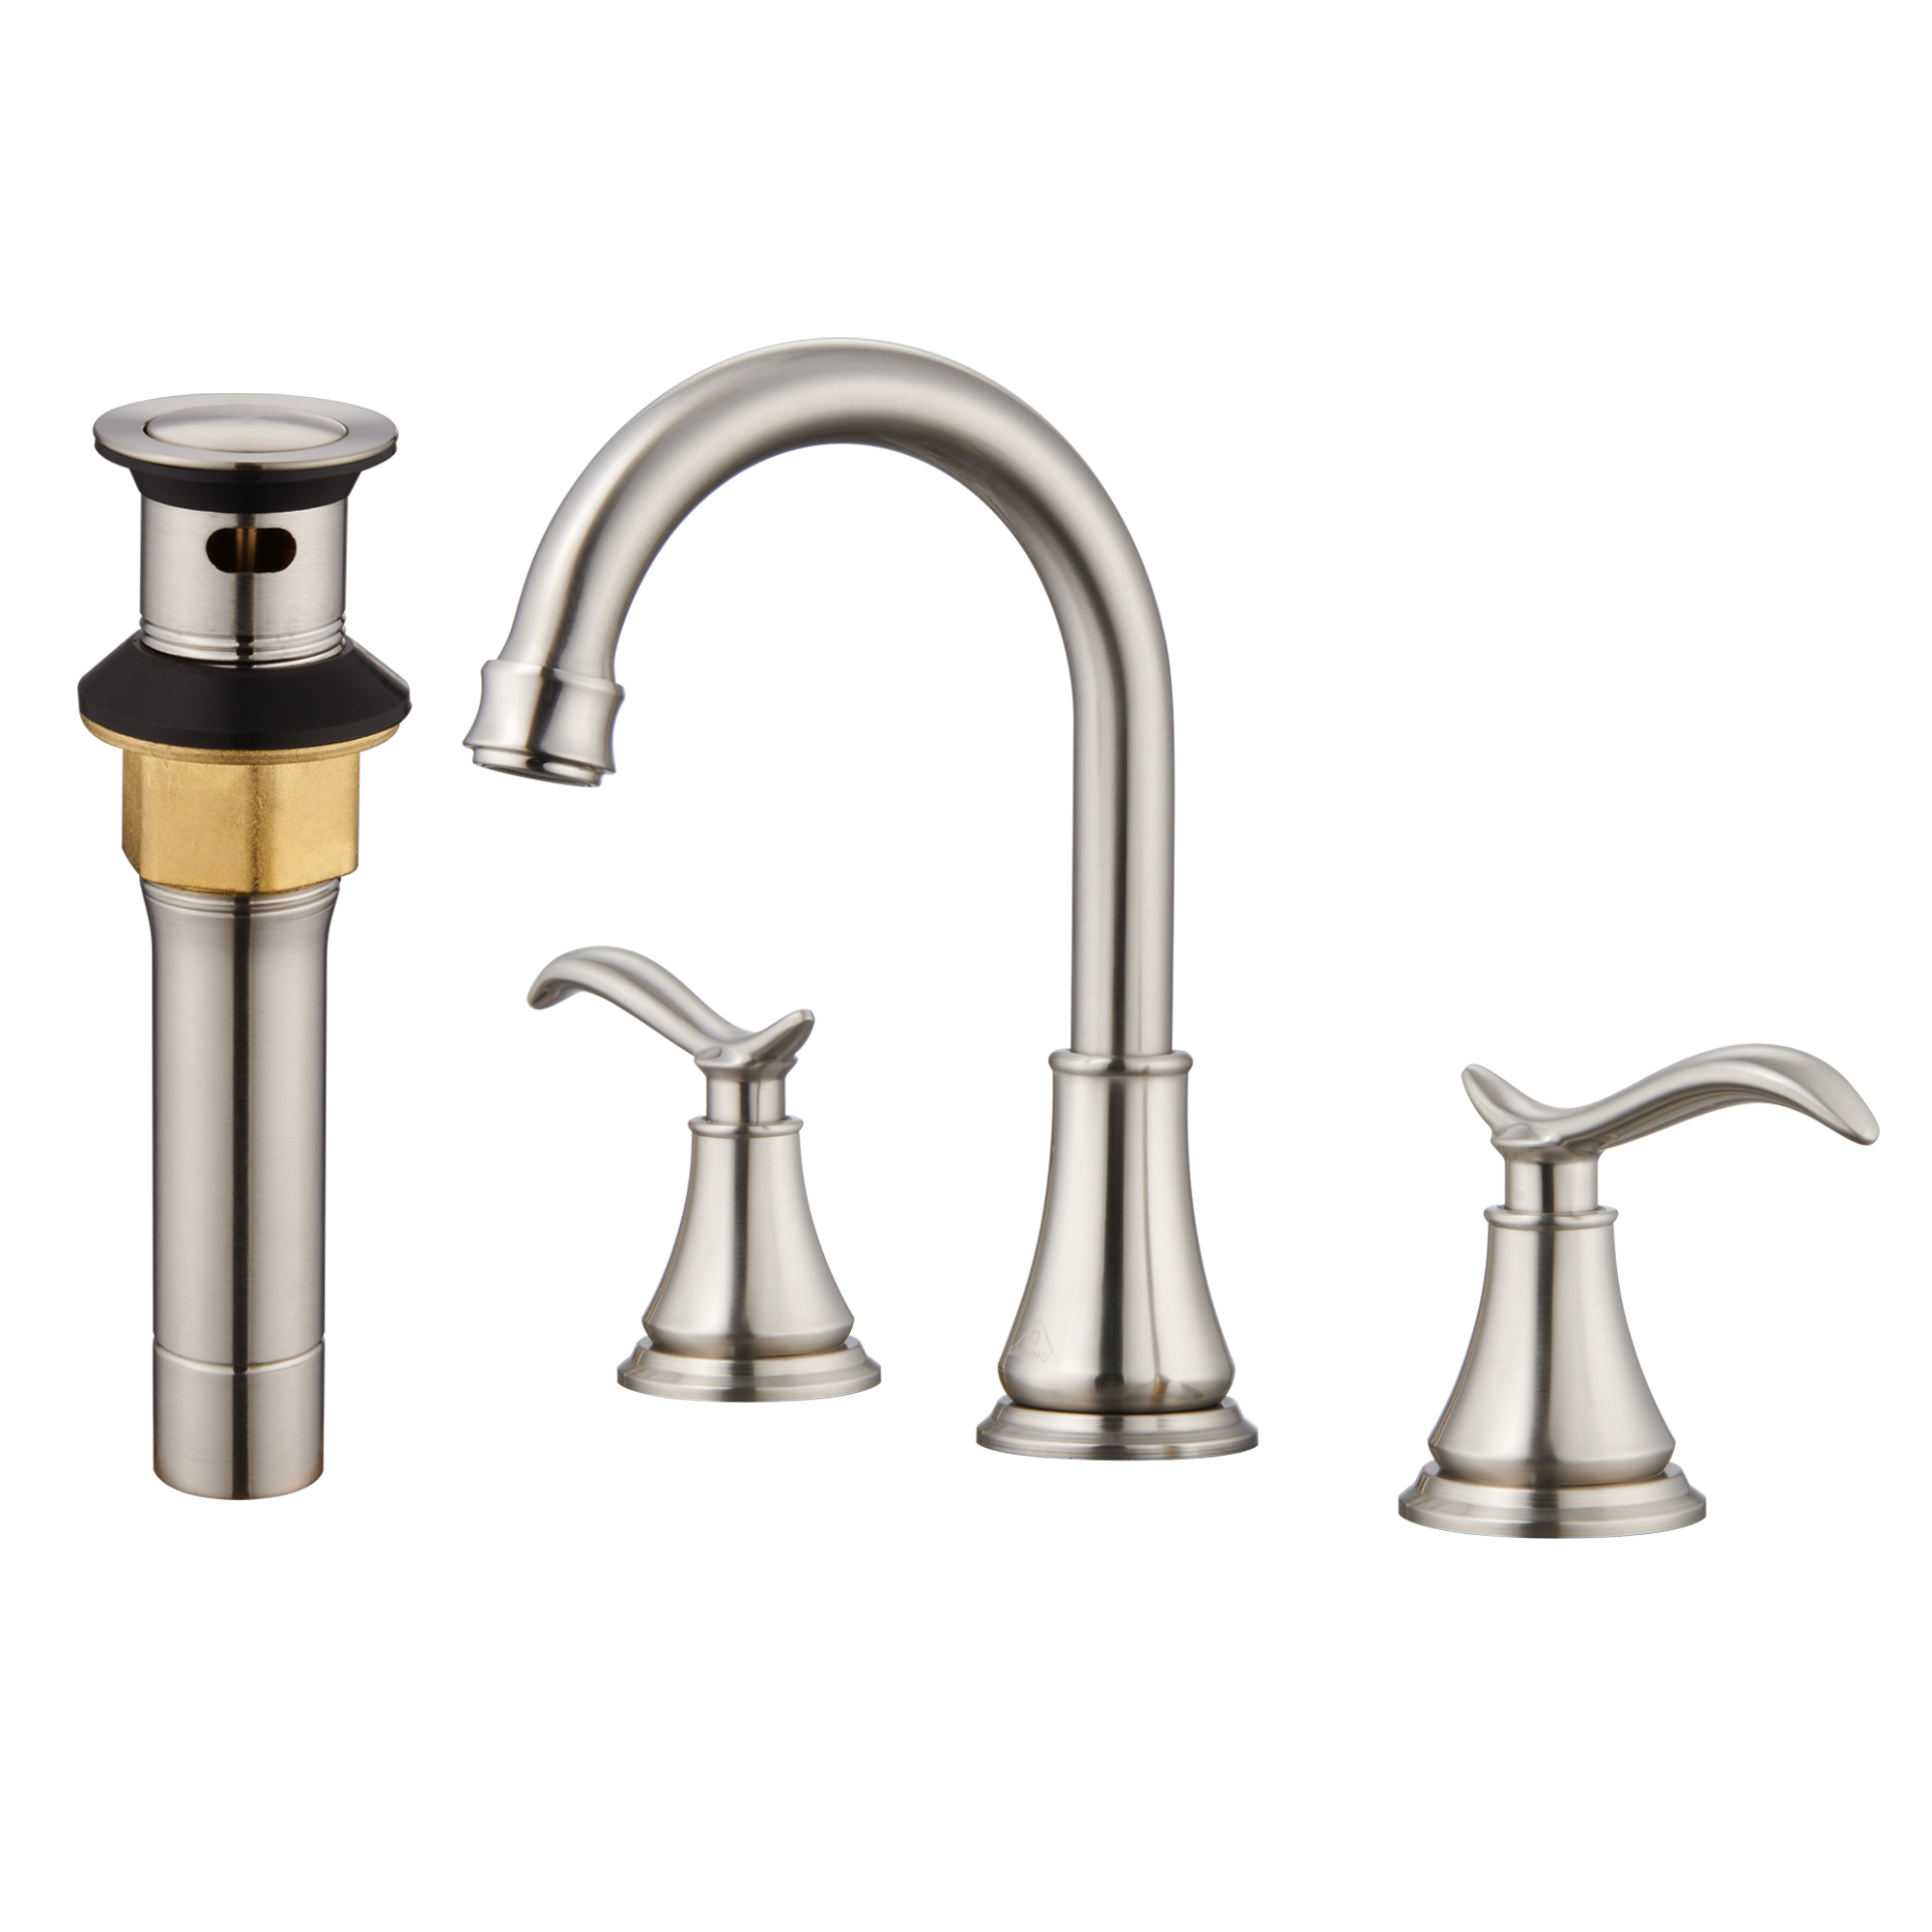 Brushed Brass Bathroom Faucet 3 Hole with Pop Up Drain (with Over Flow) and  Supply Hose, Stainless Steel 8 in Widespread Gold Bathroom Sink Faucet